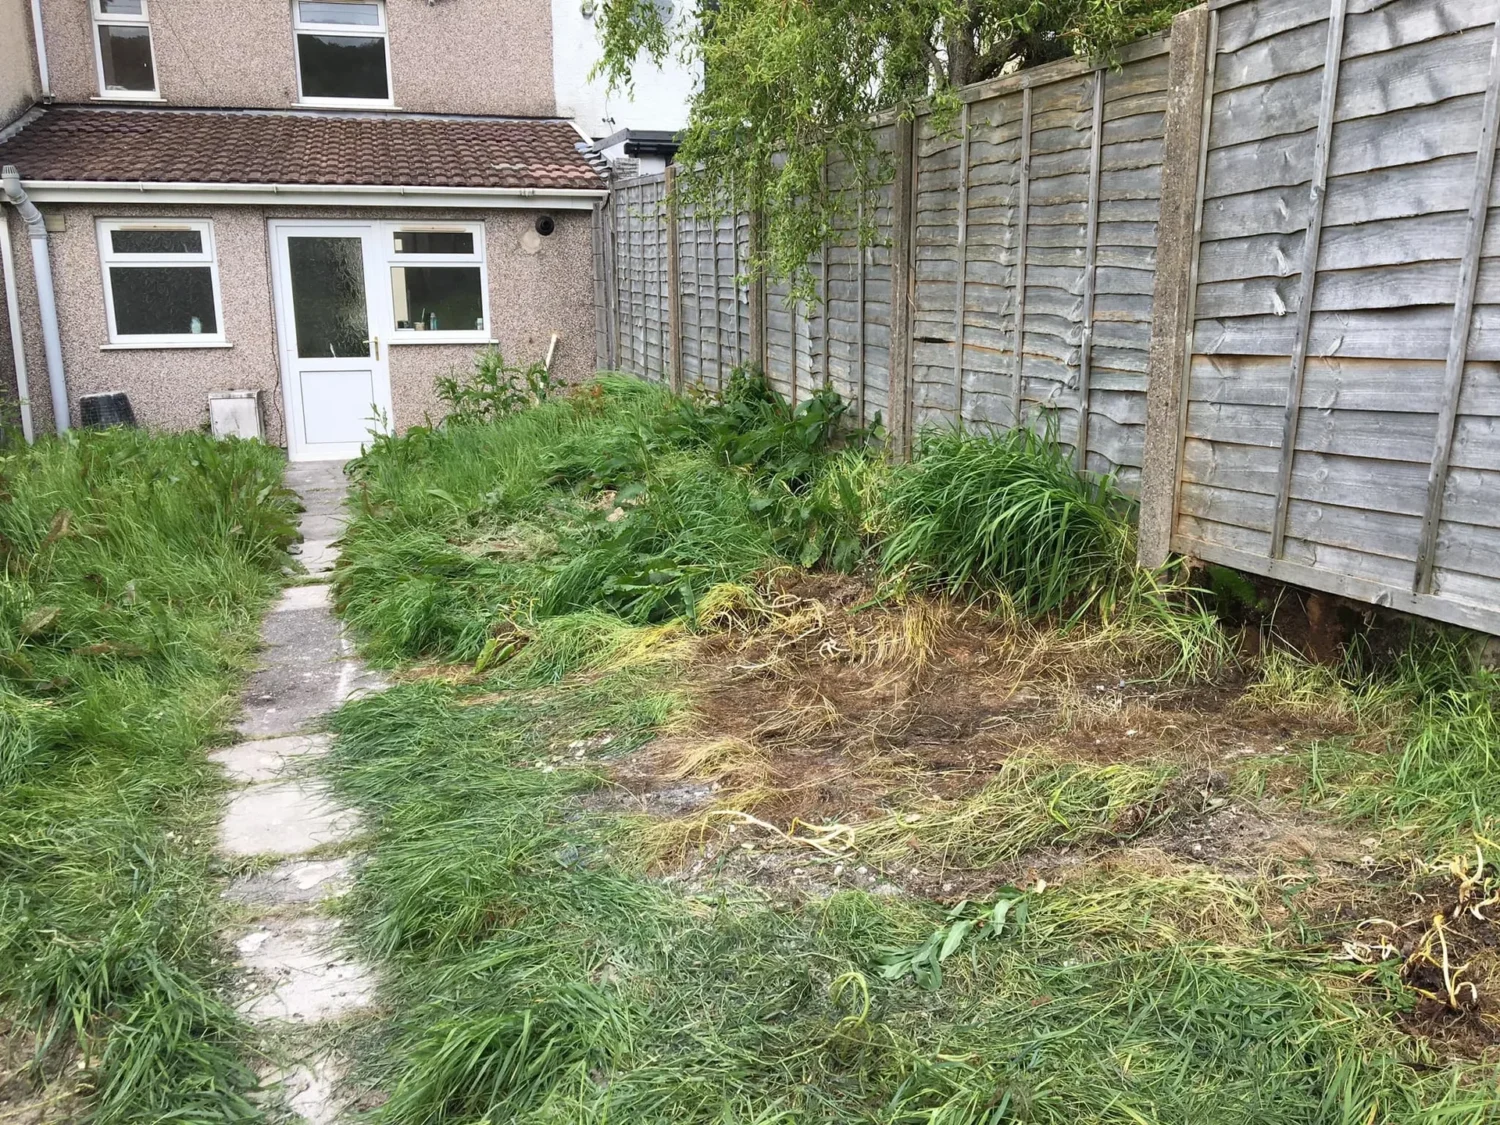 A photo of a back garden with no waste